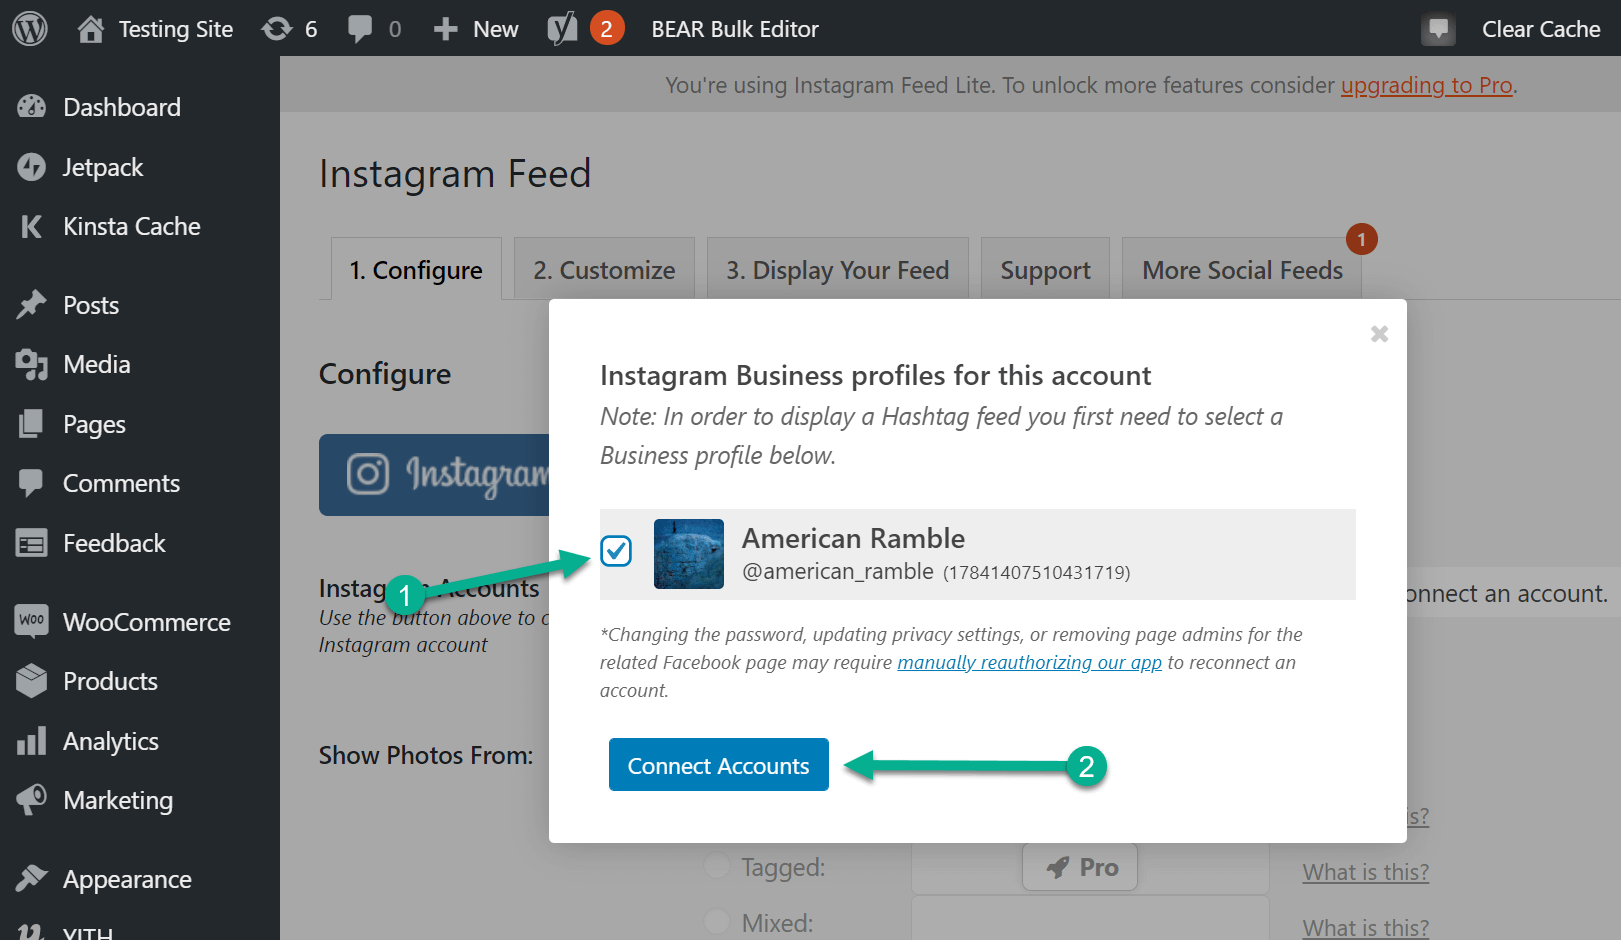 connect accounts to embed Instagram posts